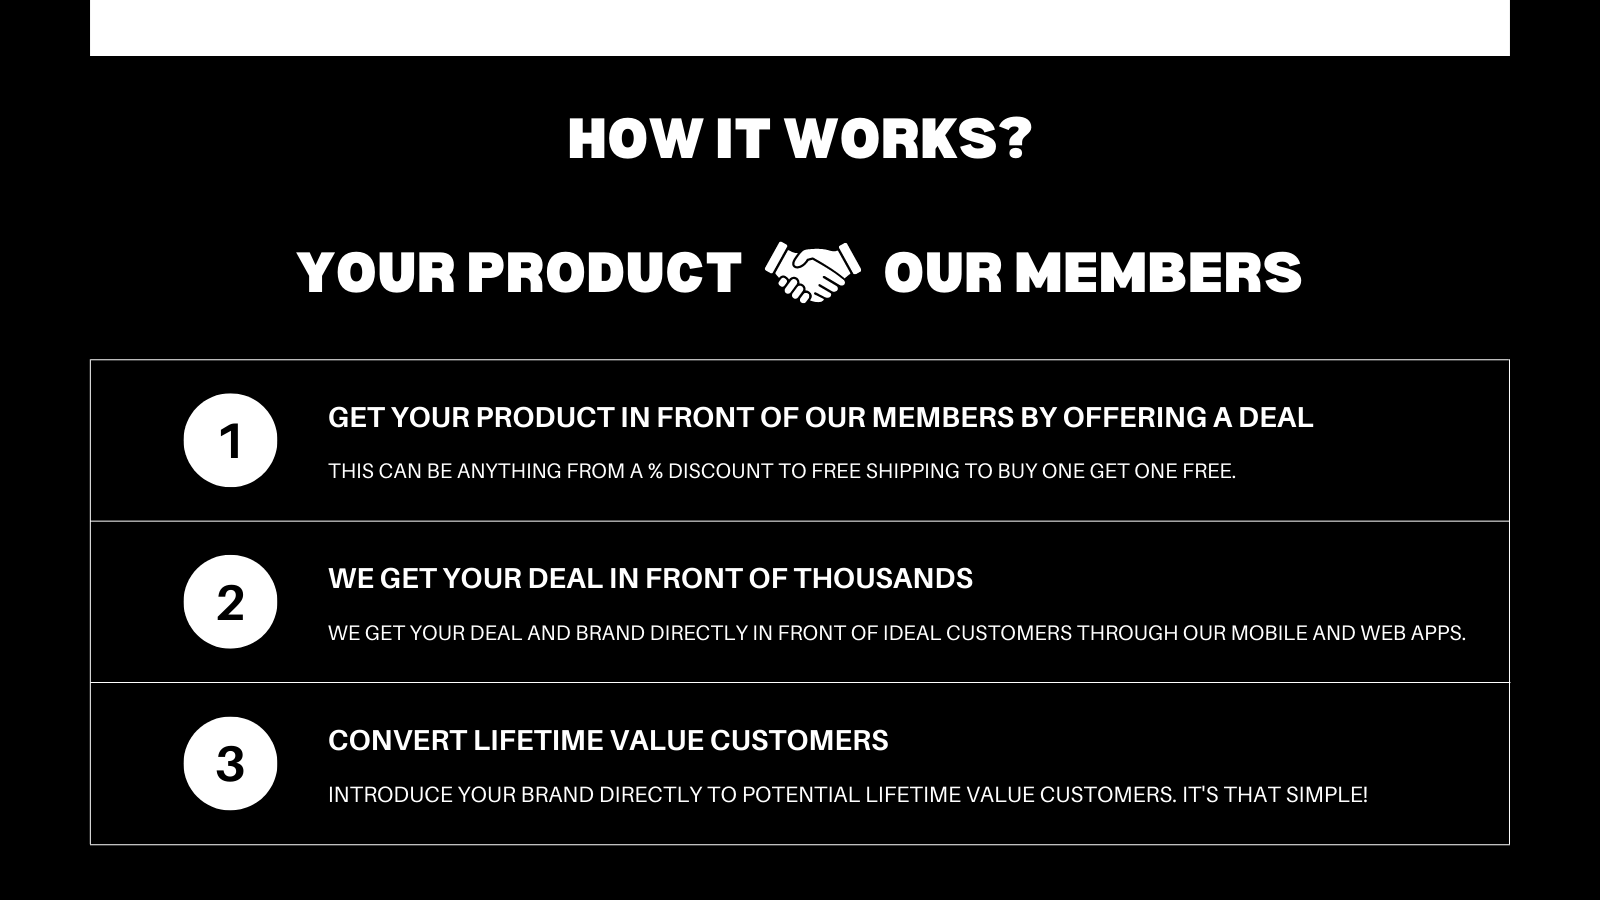 Offer a deal and introduce your brand to thousands daily. 